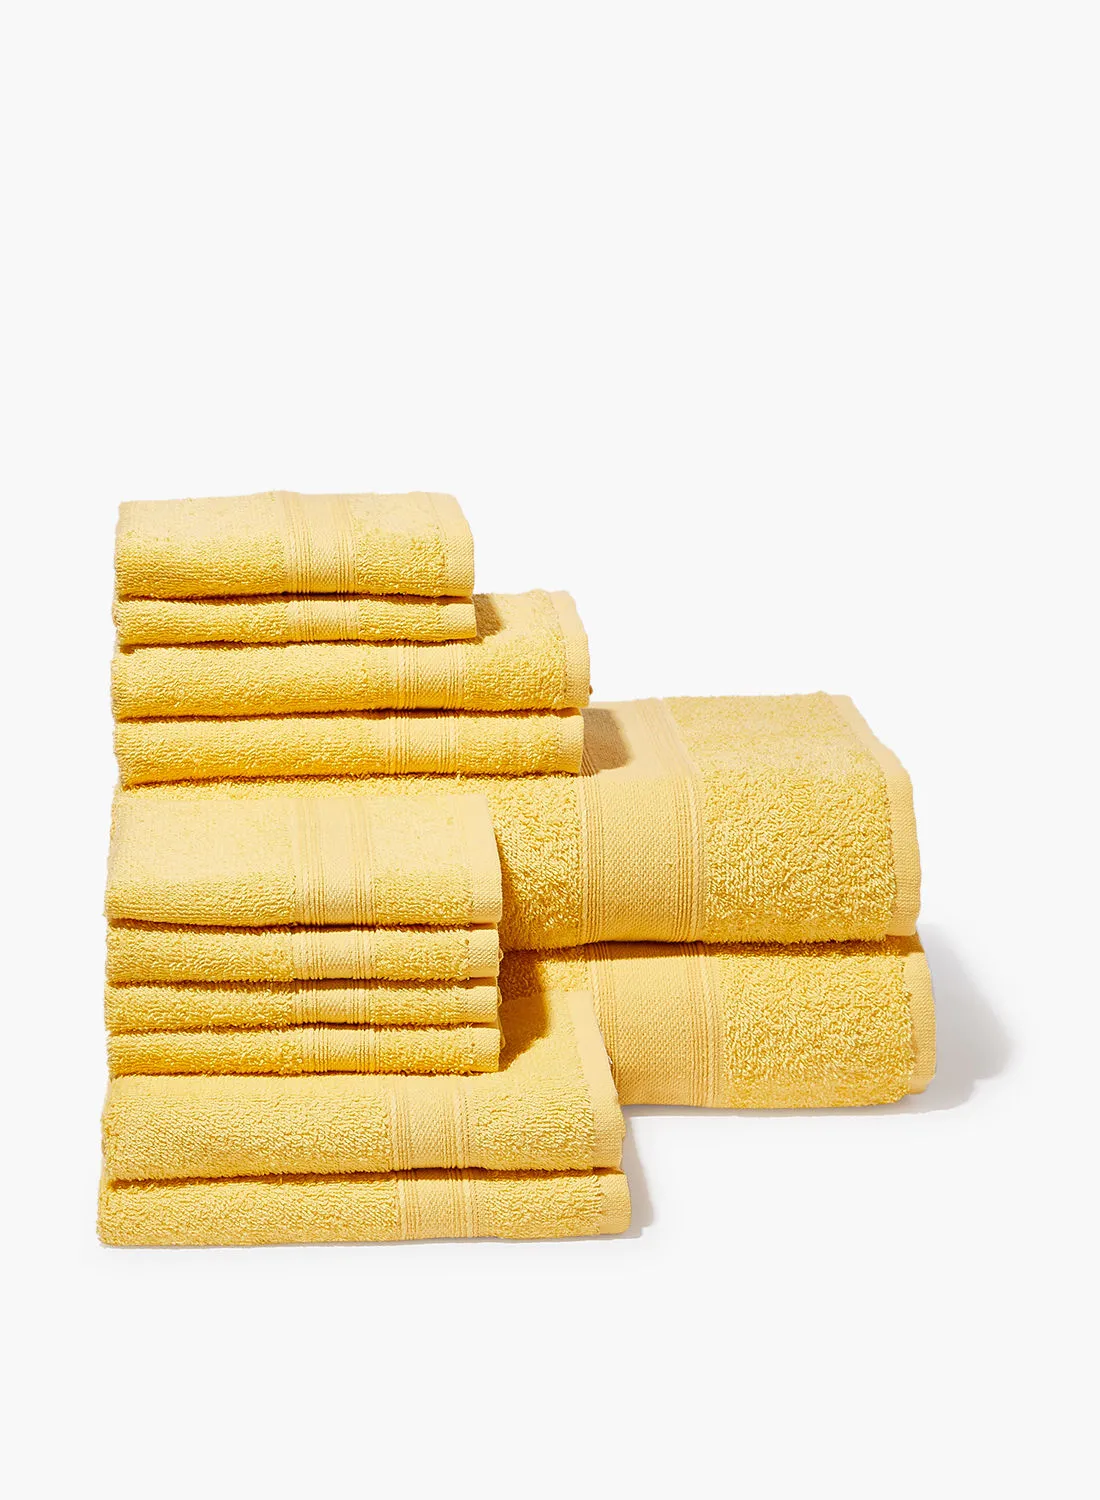 Amal 12 Piece Bathroom Towel Set - 400 GSM 100% Cotton Terry - 12 Face Towel - Yellow Color -Quick Dry - Super Absorbent